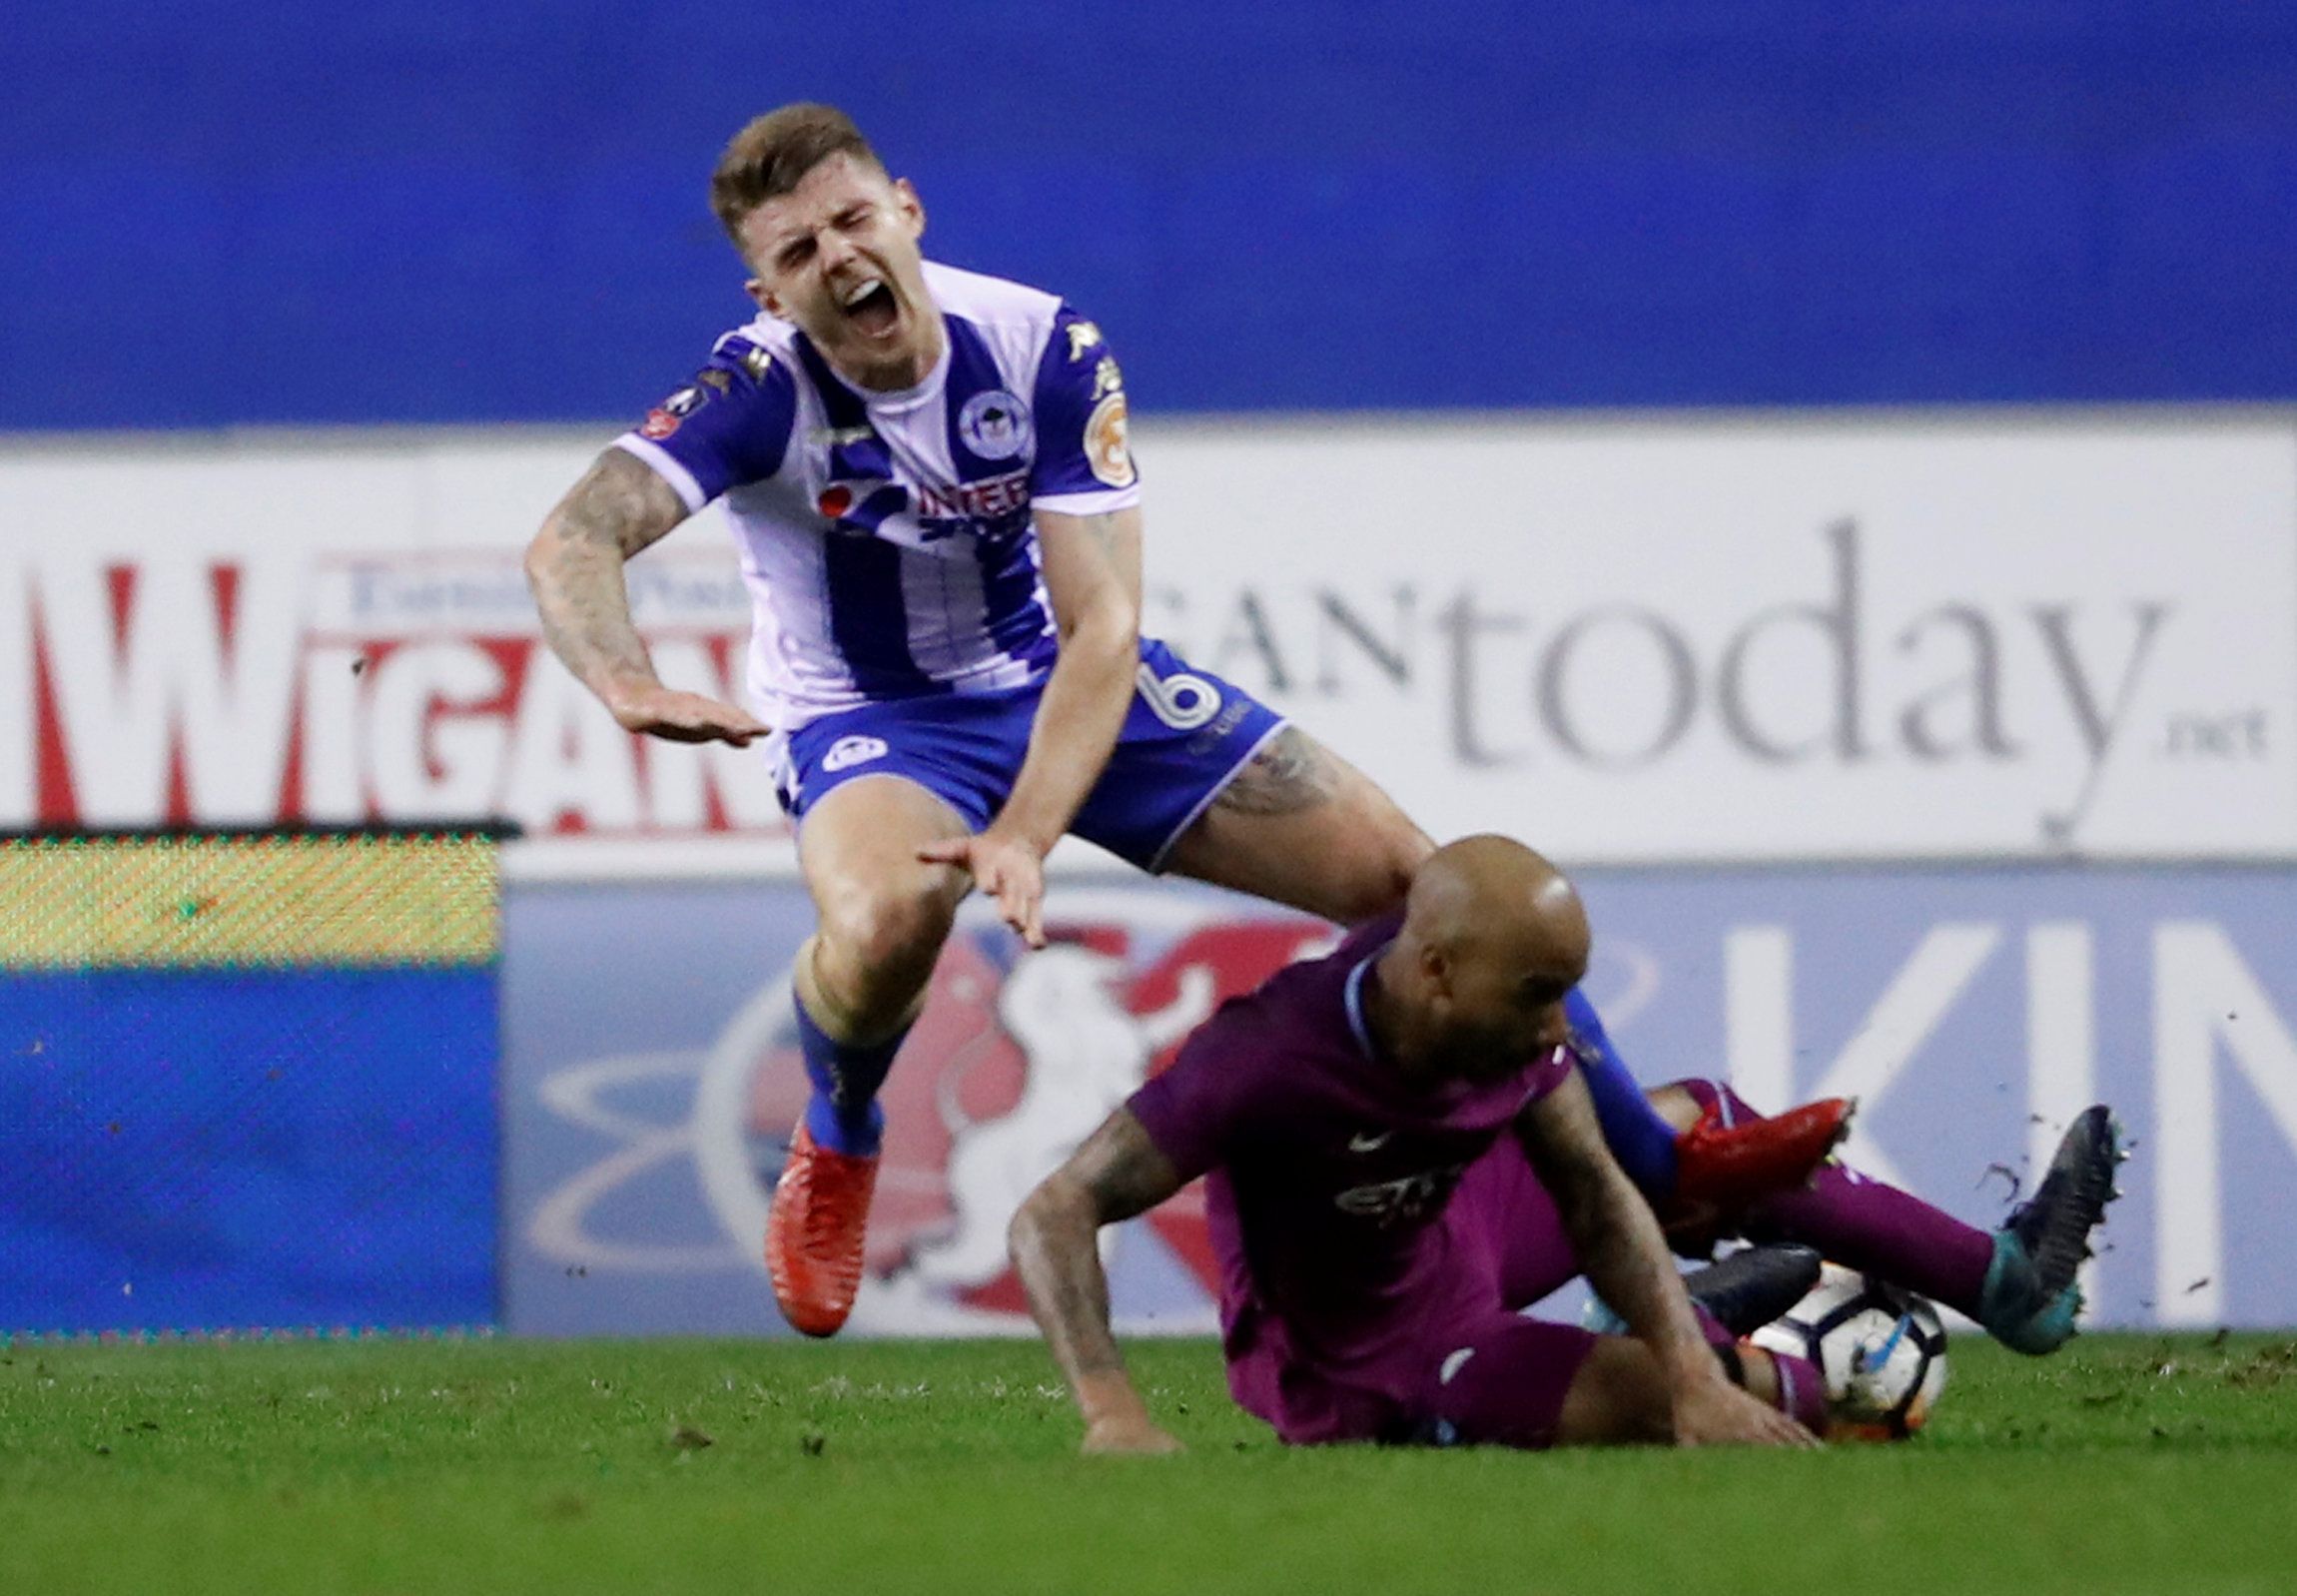 Soccer Football - FA Cup Fifth Round - Wigan Athletic vs Manchester City - DW Stadium, Wigan, Britain - February 19, 2018   Manchester City's Fabian Delph fouls Wigan Athletic’s Max Power and was subsequently shown a red card   Action Images via Reuters/Carl Recine